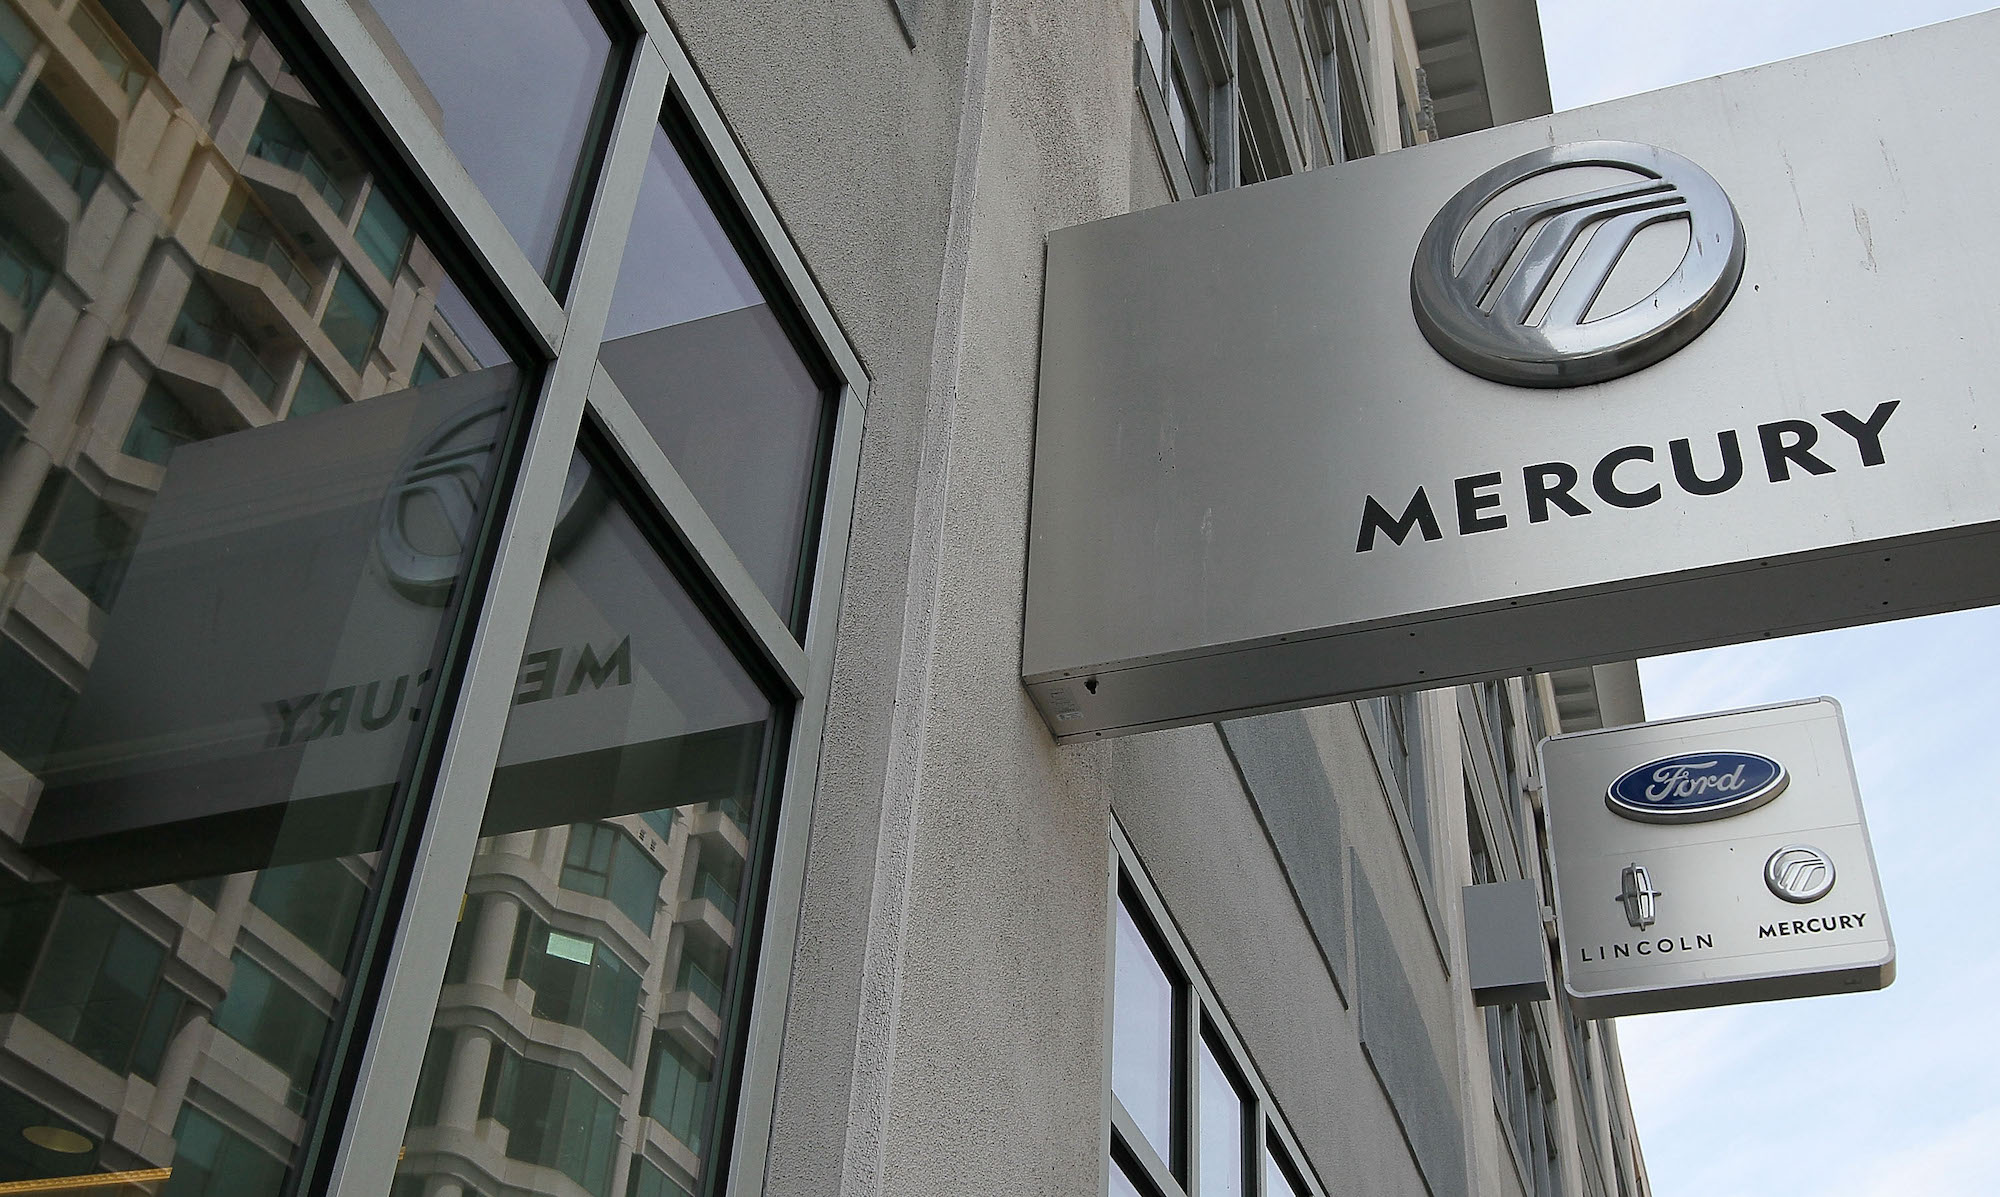 The Mercury logo is displayed on a sign outside San Francisco Ford Lincoln Mercury on June 2, 2010, in San Francisco, California